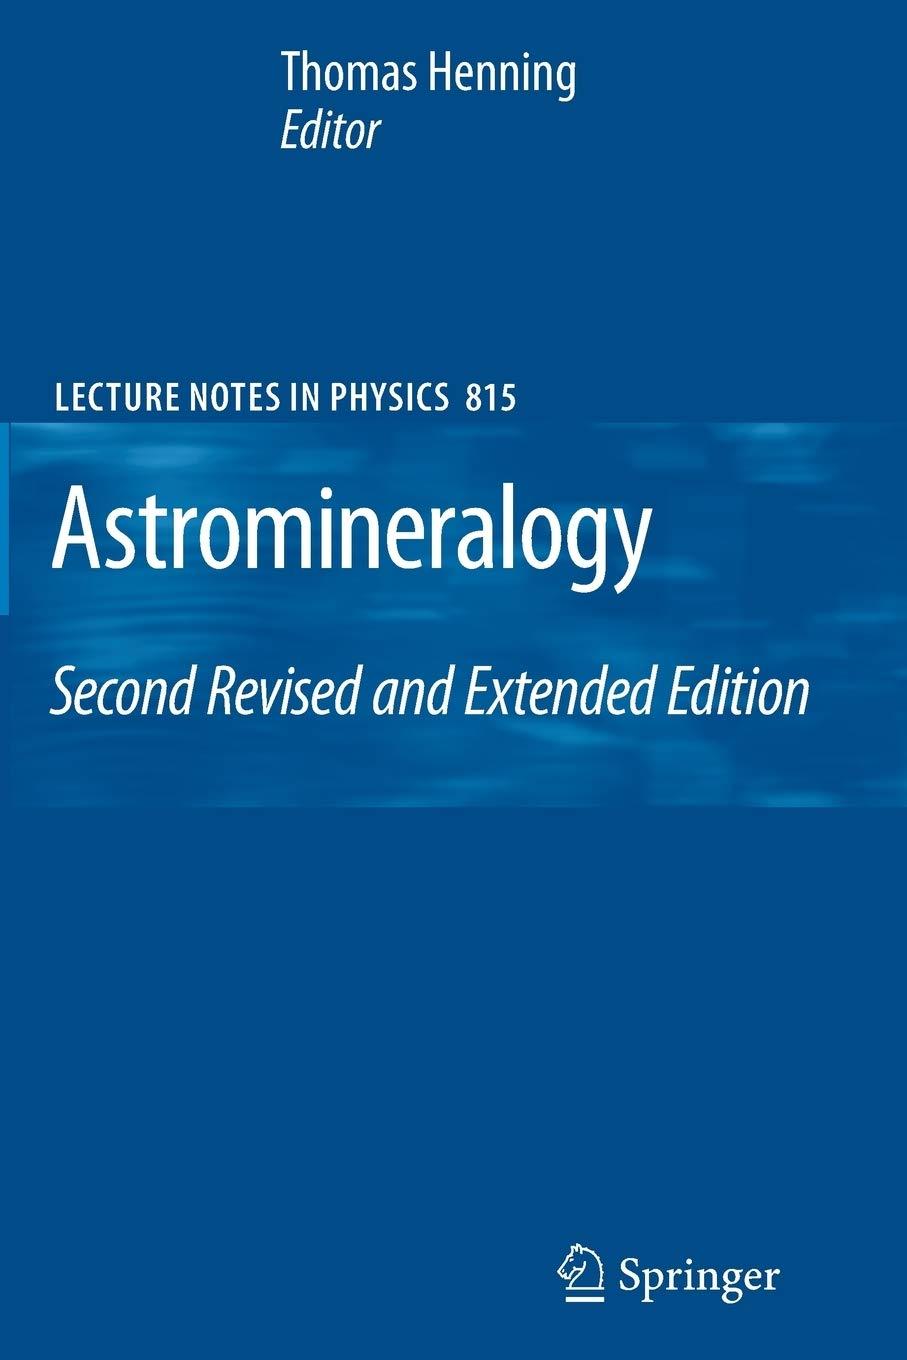 astromineralogy 2nd revised and extended edition thomas henning 3642132588, 978-3642132582